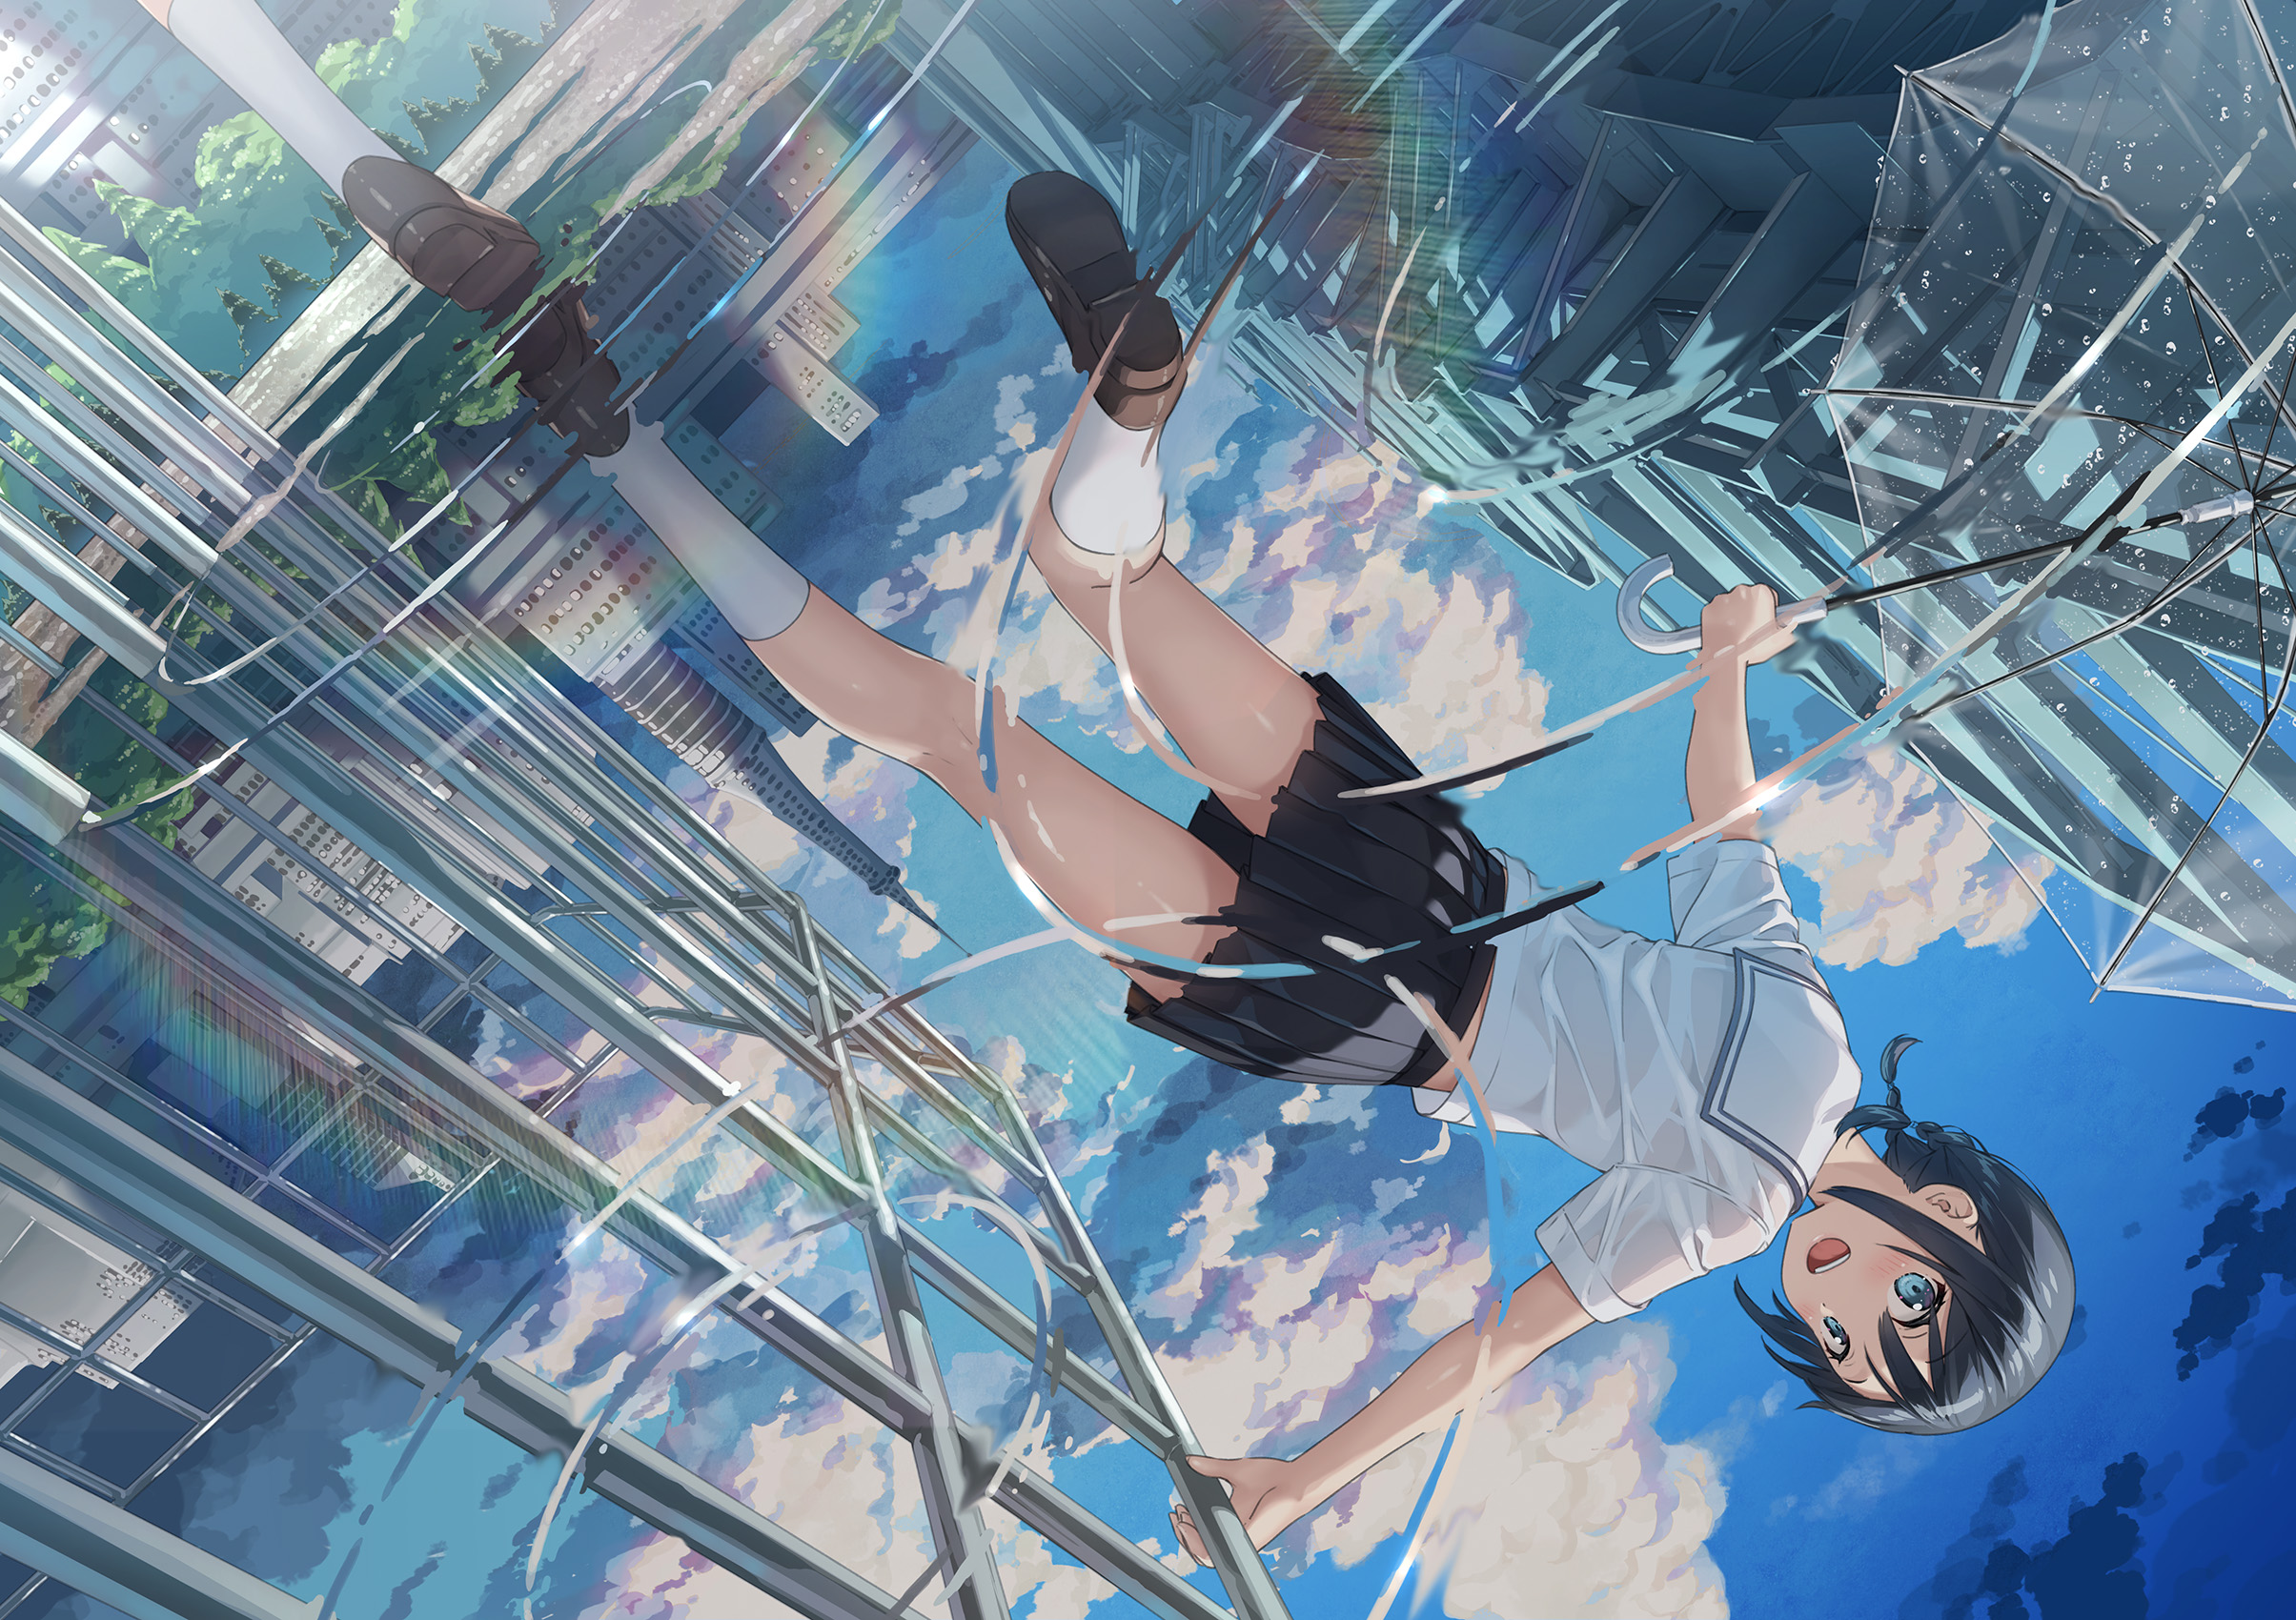 Anime 2409x1700 Kantoku anime girls schoolgirl school uniform reflection water wet clothing clouds umbrella outdoors rainbows short hair sky looking back looking at viewer city building cityscape puddle ripples blue eyes dark hair sunlight knee-highs cumulus skirt blushing open mouth wet